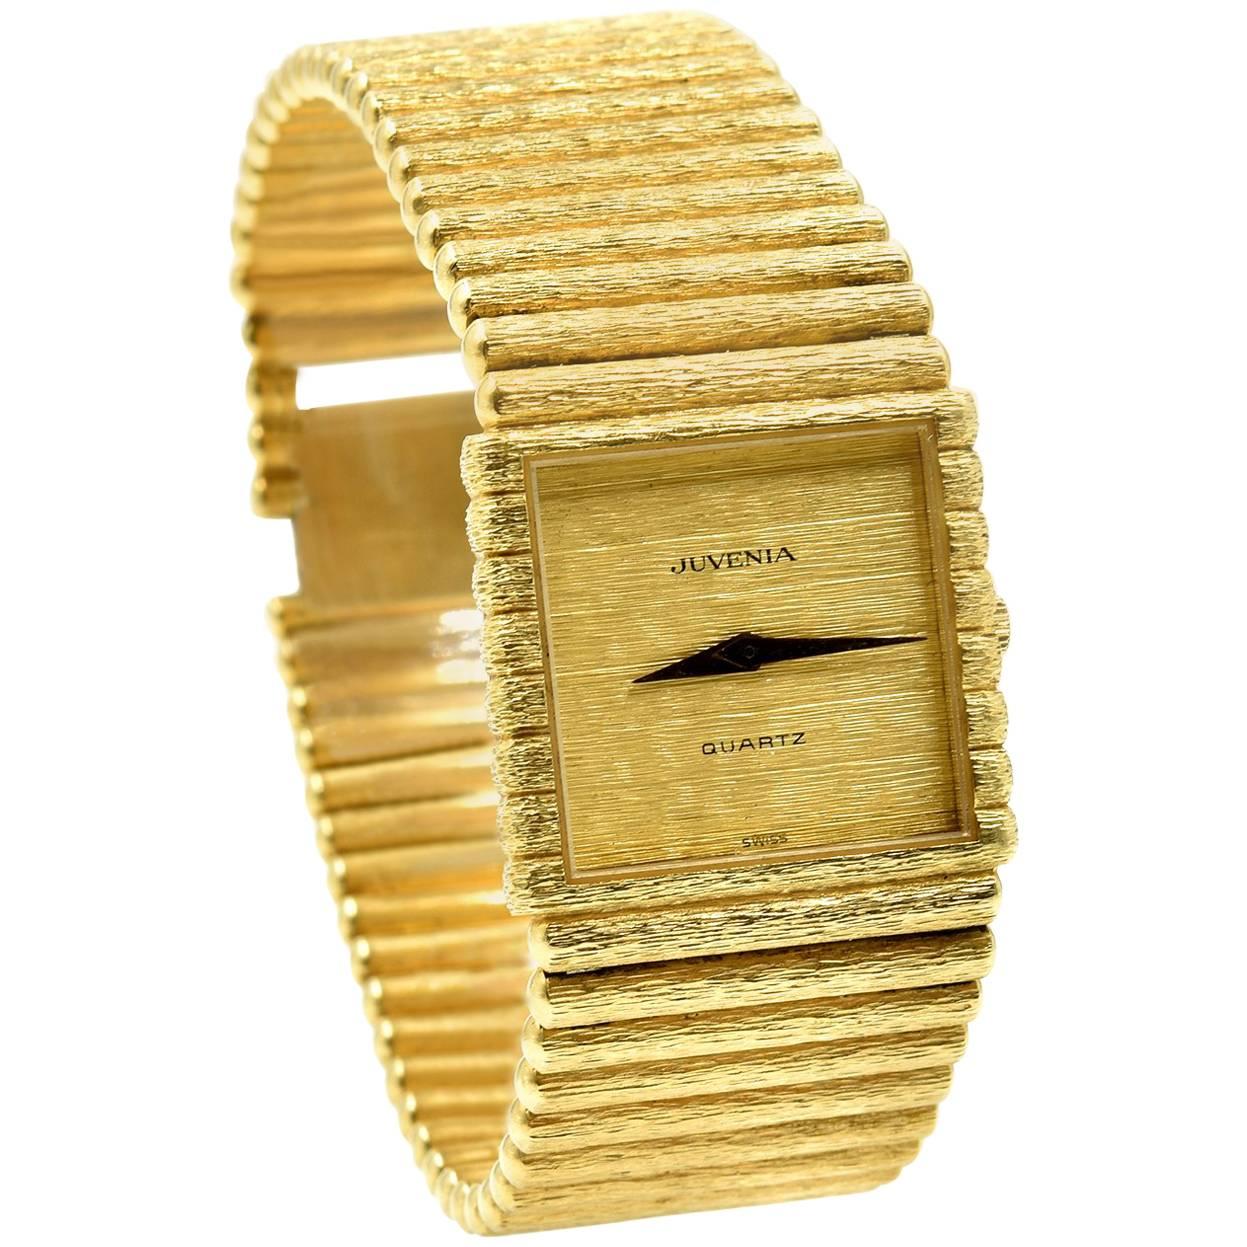 Movement: quartz
Function: hour, minutes
Case: square 25.00mm 18k yellow gold case with sapphire crystal, bark finish case with high-polish case back, pull/push crown
Dial: bark finish dial with gold hands
Band: 18k yellow gold bark finish bracelet